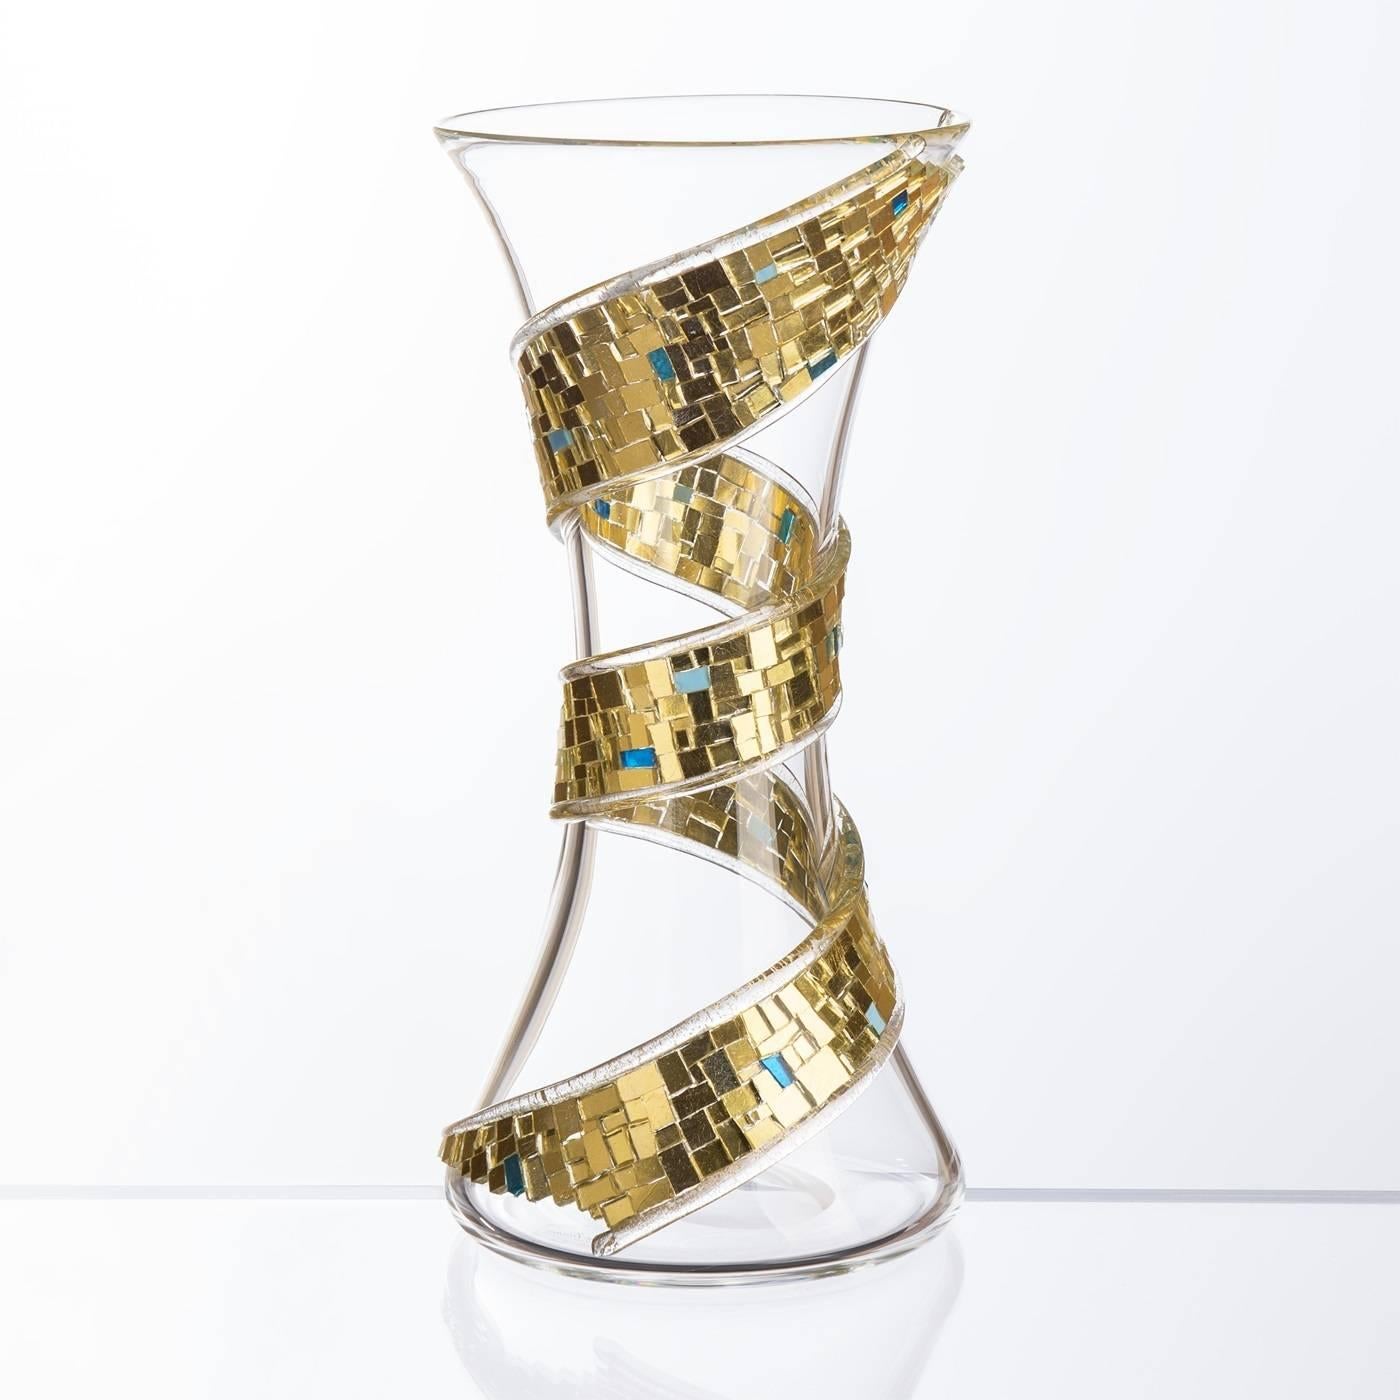 An extraordinary vase of great visual impact and a true one-of-a-kind piece. Part of the Art Collection, it is handcrafted in Murano where master glassblowers, following ancient techniques, have applied by hand the two gold and crystal threads on